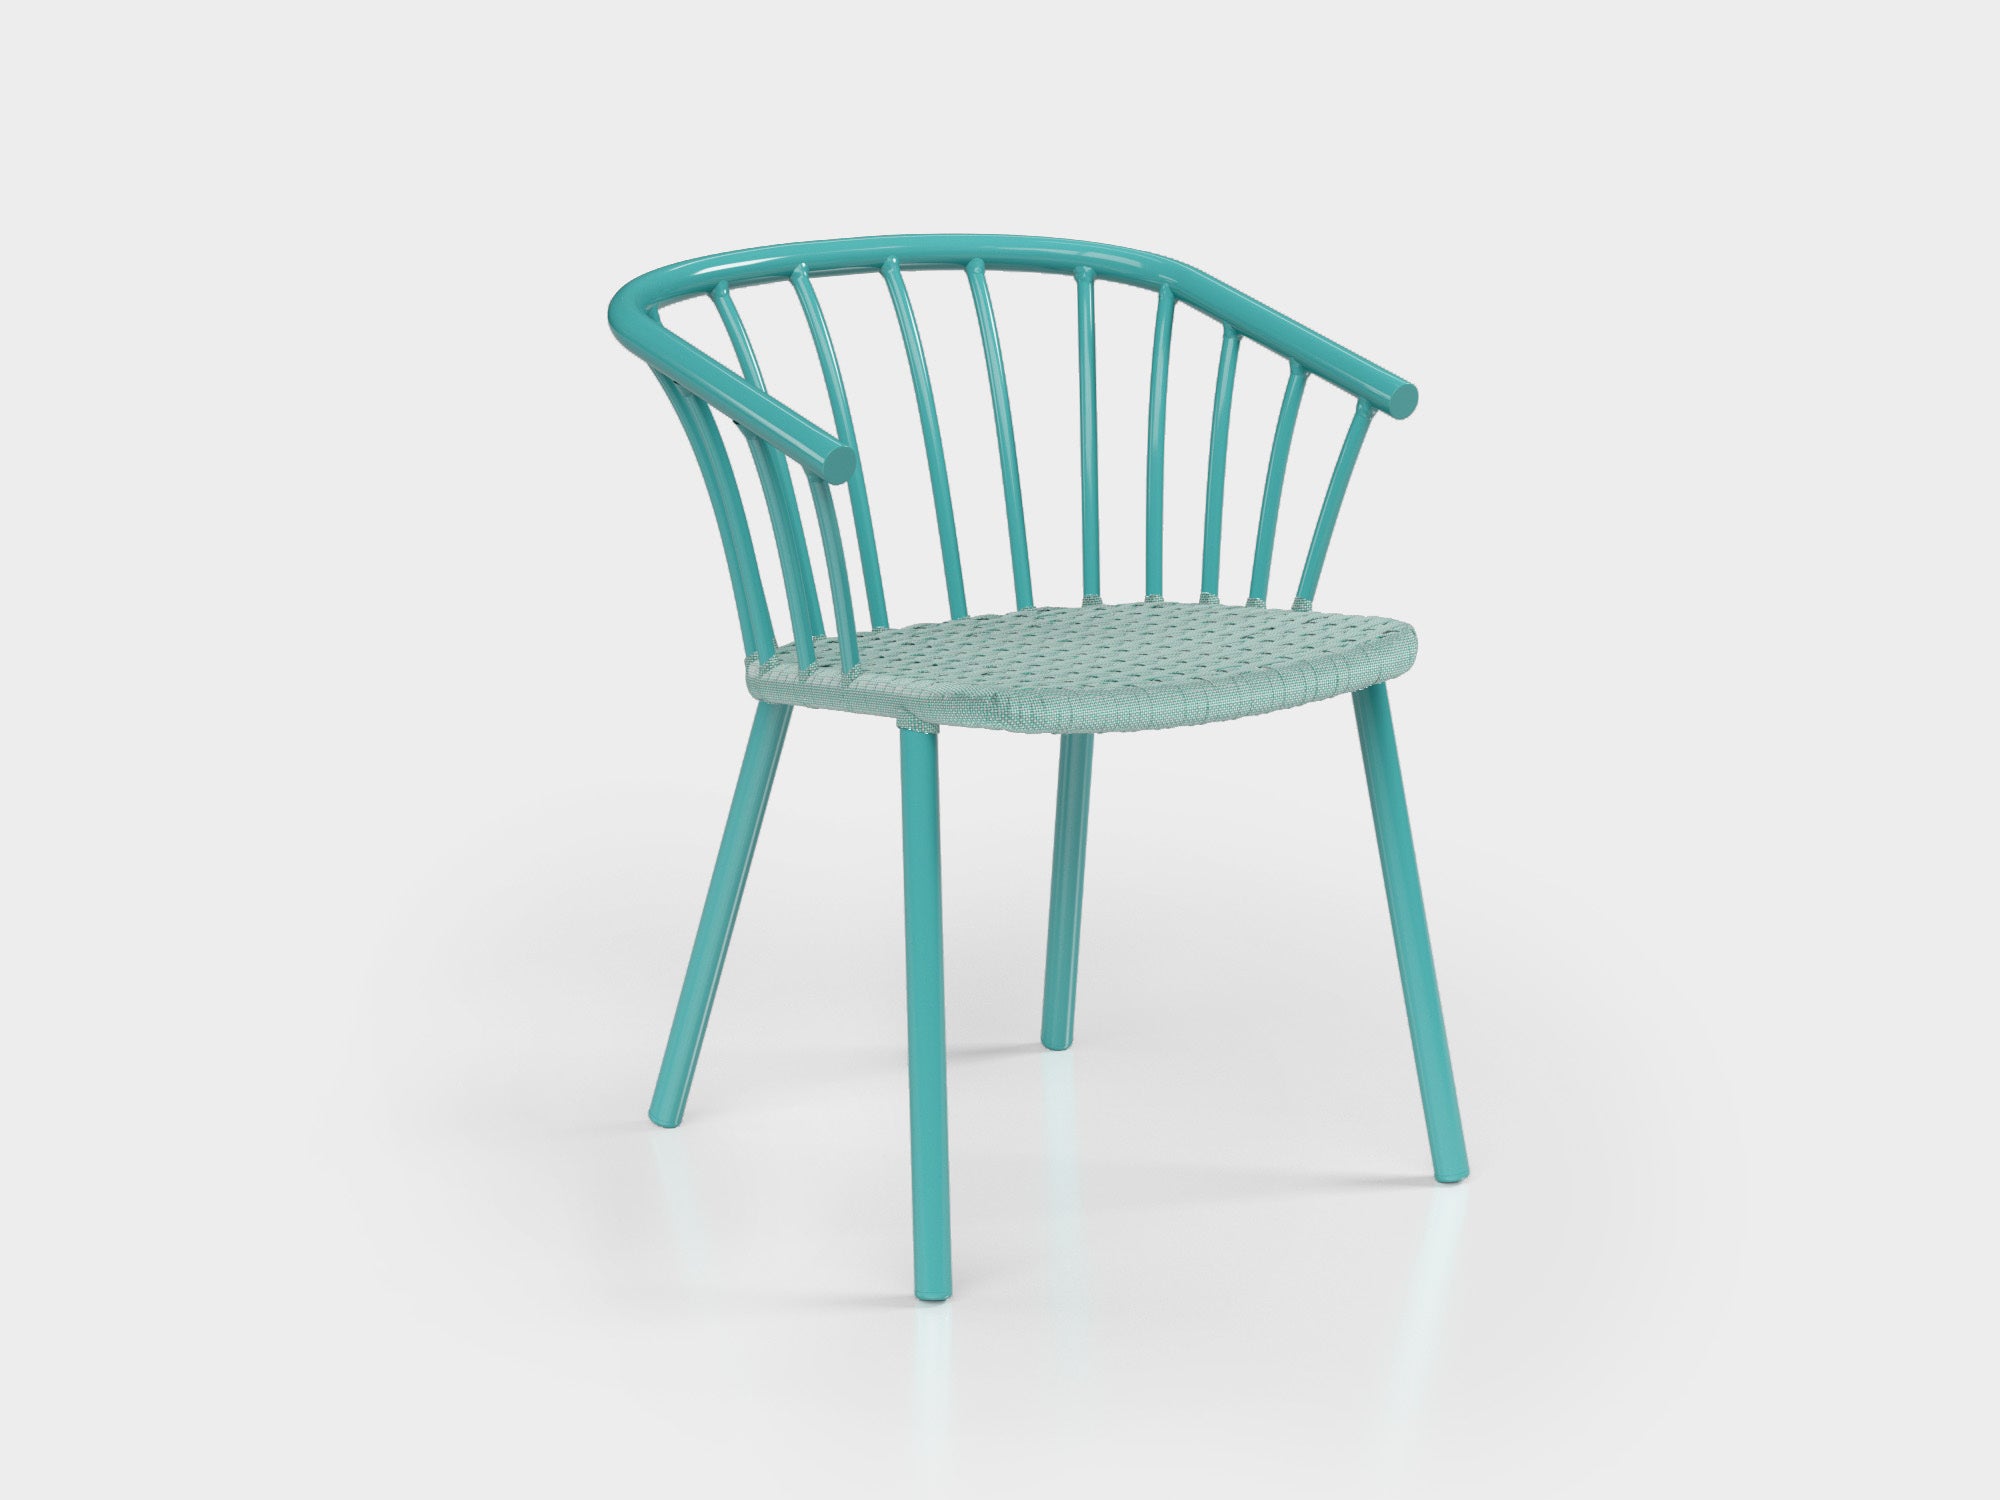 Biarritz chair made of turquoise aluminium with braided nautical rope seat, designed by Luciano Mandelli